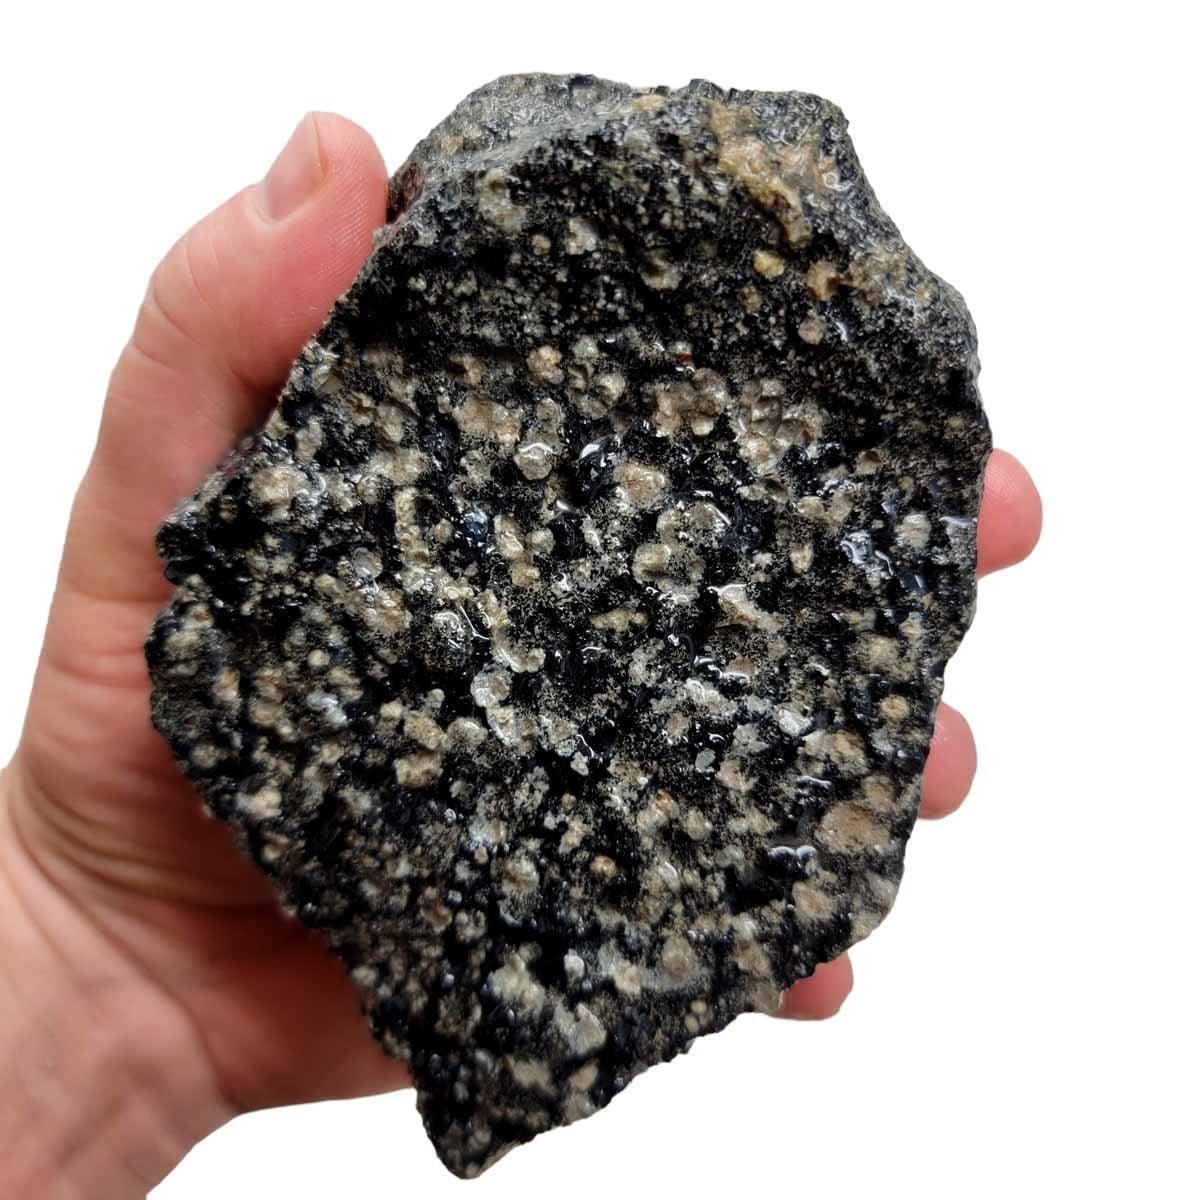 Flower/Fireworks Obsidian Rough Chunk! - LapidaryCentral